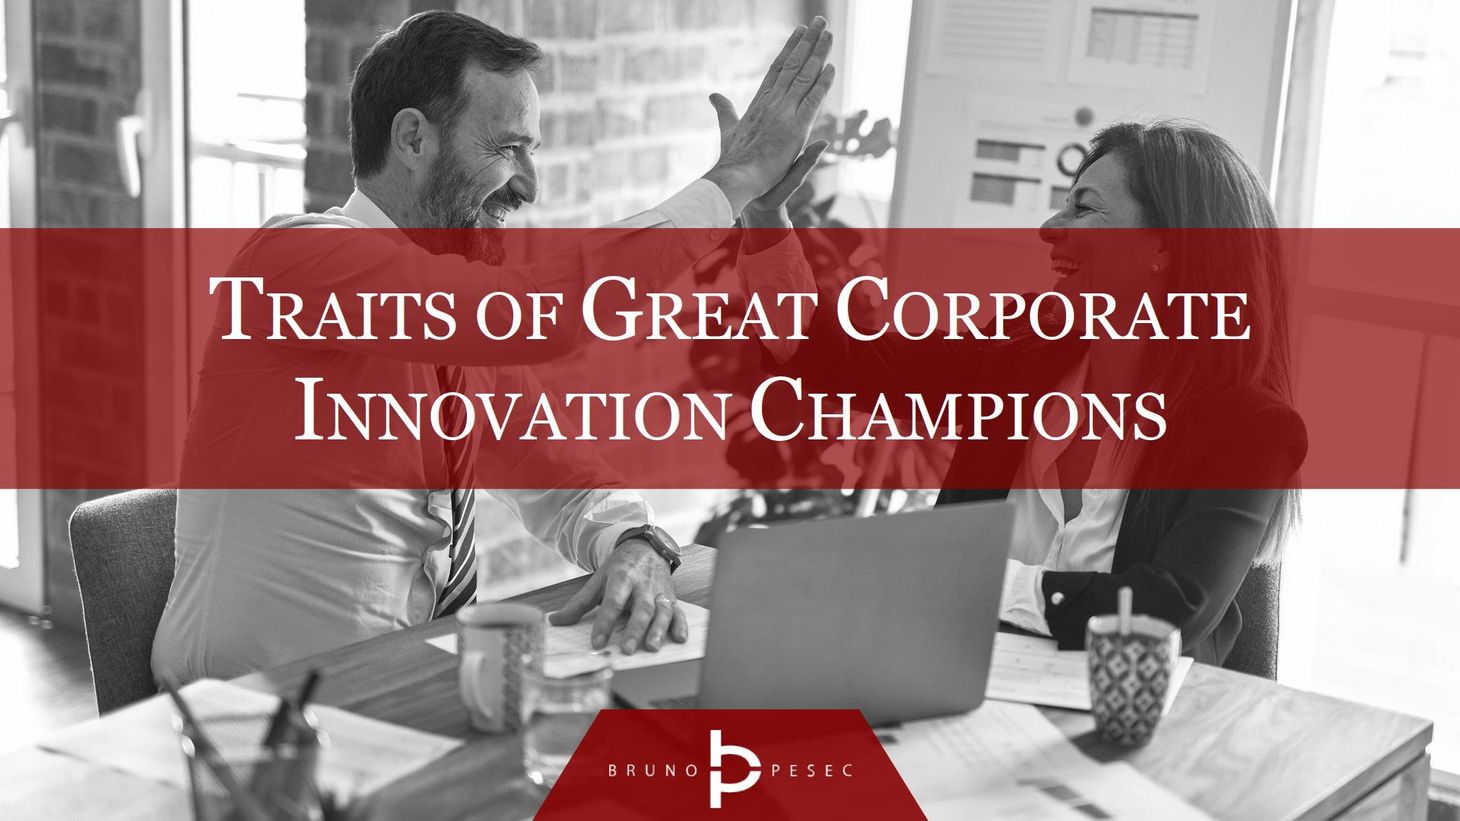 Traits of great corporate innovation champions